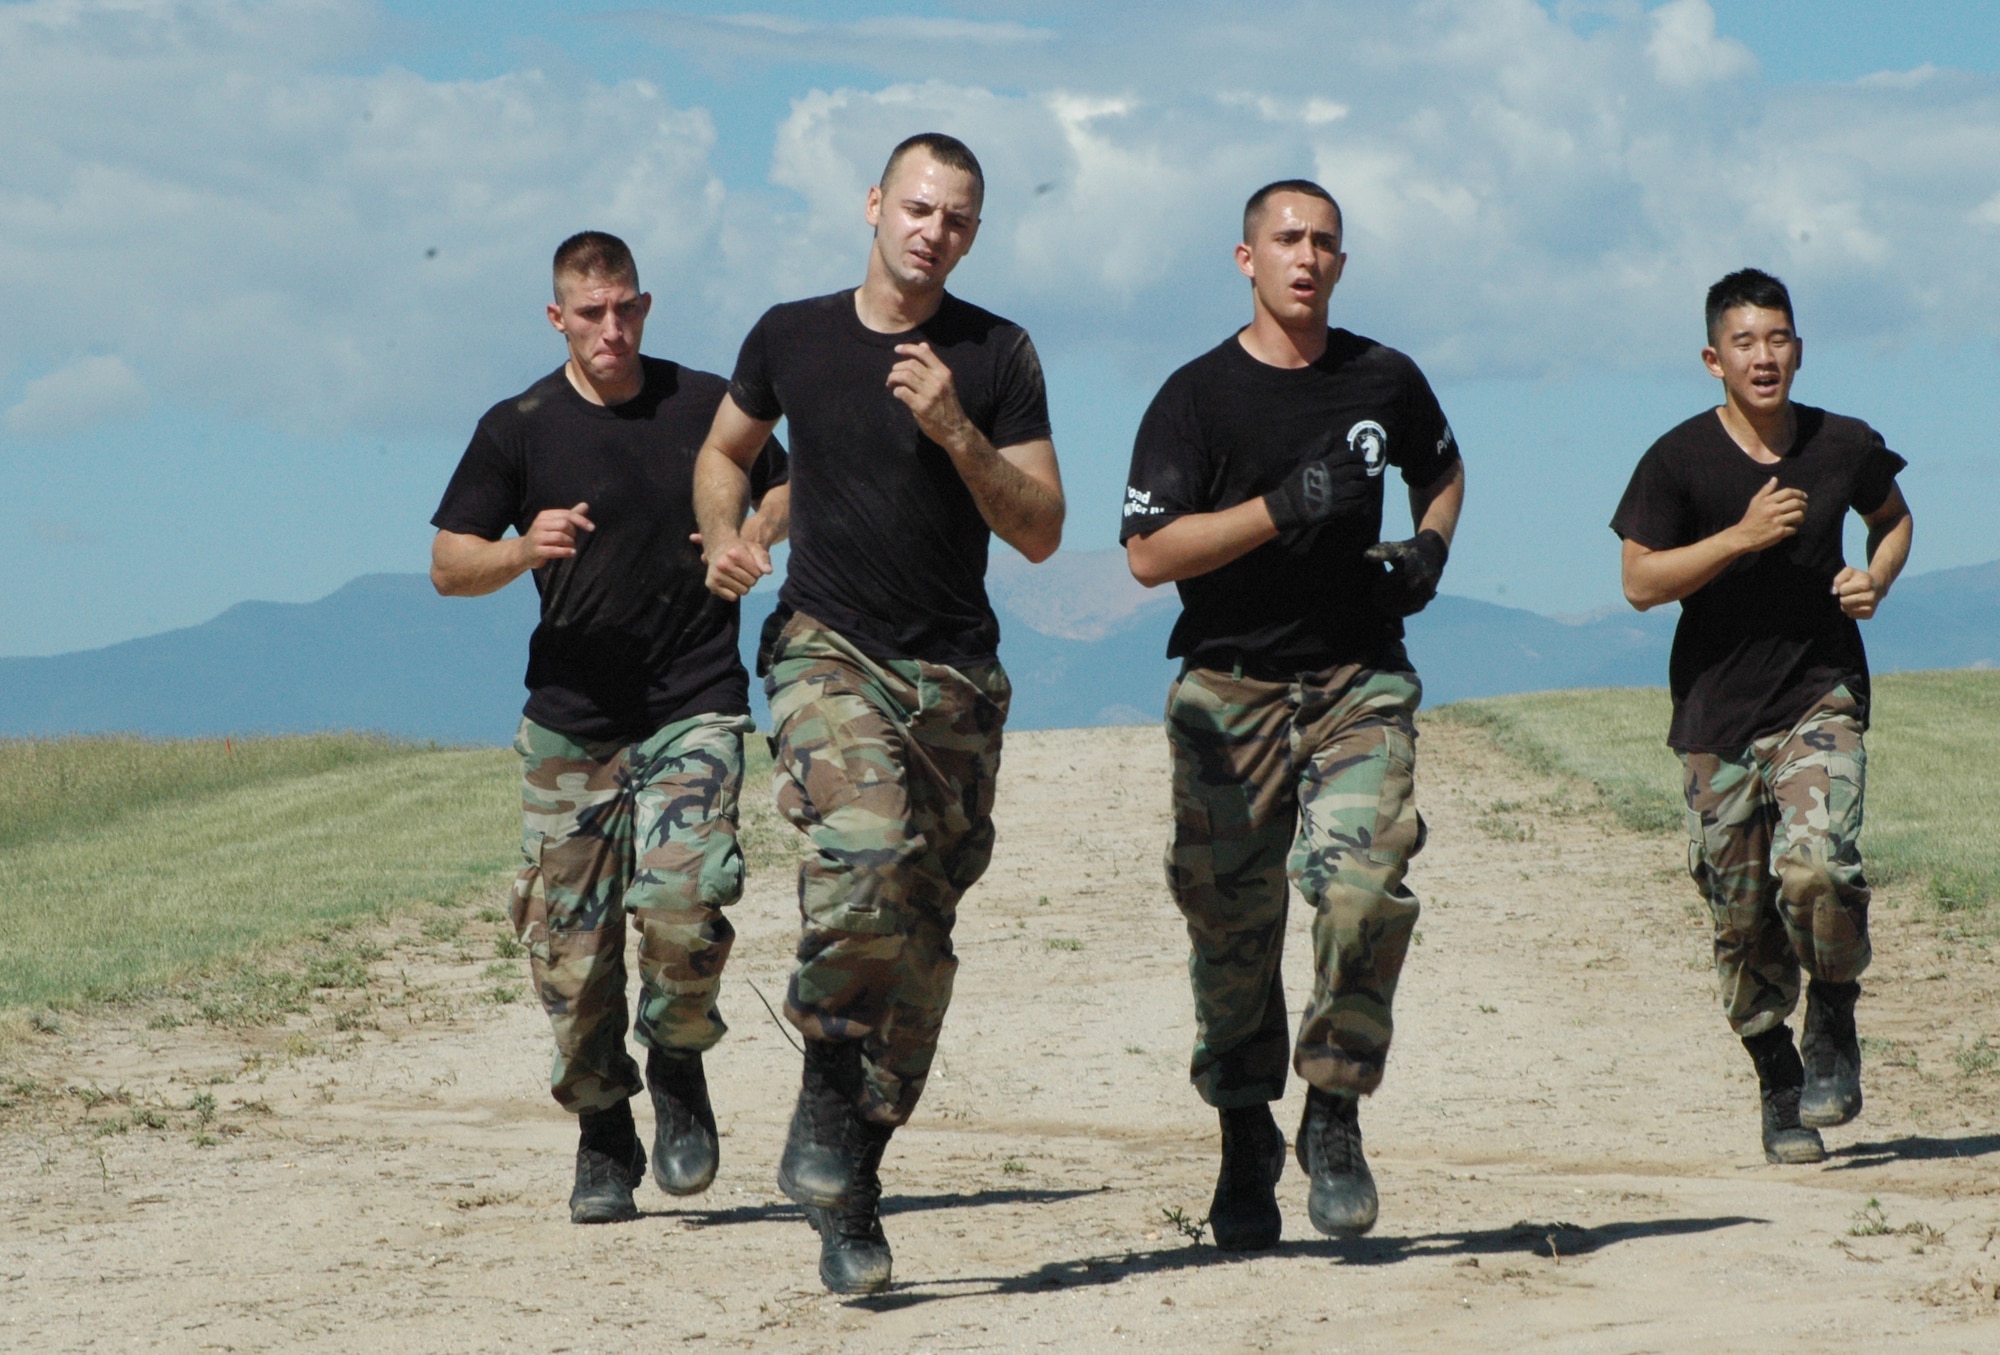 MINOT AIR FORCE BASE, N.D. -- (from left to right) Senior Airman James Rowin, Staff Sgt. Jesse Guerra, Senior Airman Will Benson and Airman 1st Class Tom Donahue, all from the 91st Security Forces Group, run as they close in on the finish line on the obstacle course at Shriever Air Force Base, Colo. on the last day of competition during Guardian Challenge. (U.S. Air Force photo by Senior Airman Danny Monahan)